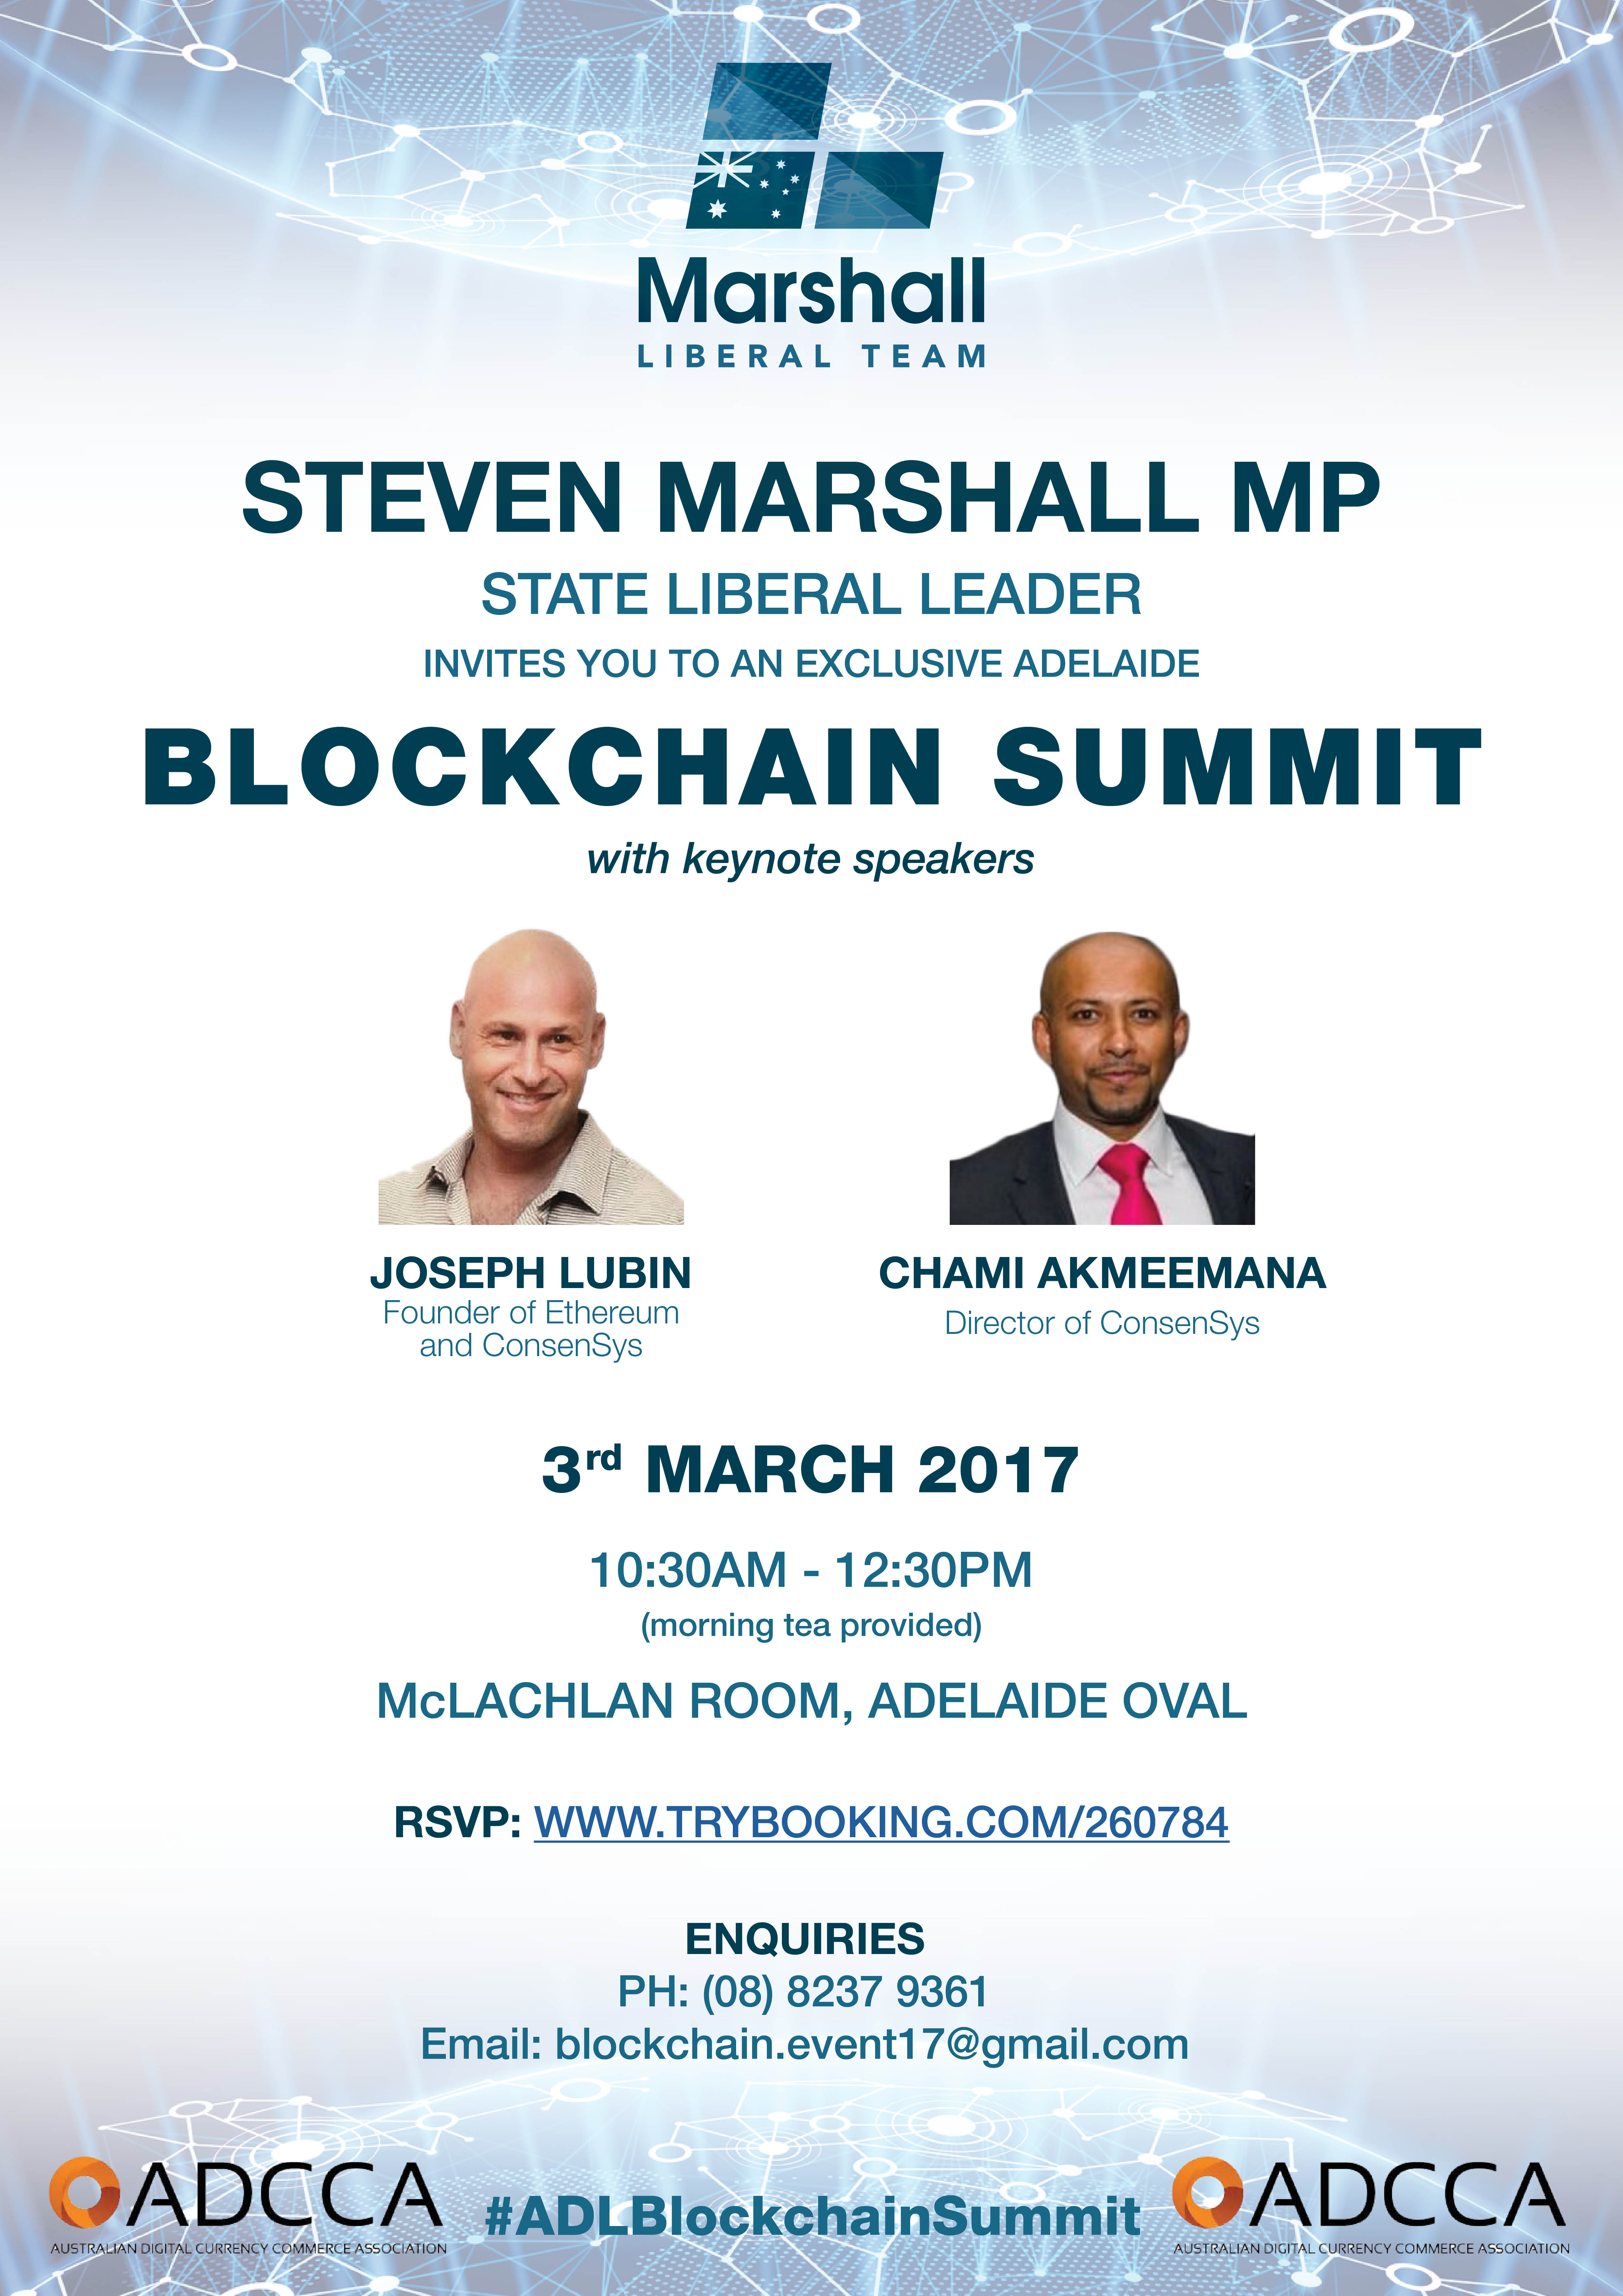 PICTURE: Premier embroiled in dubious blockchain claim